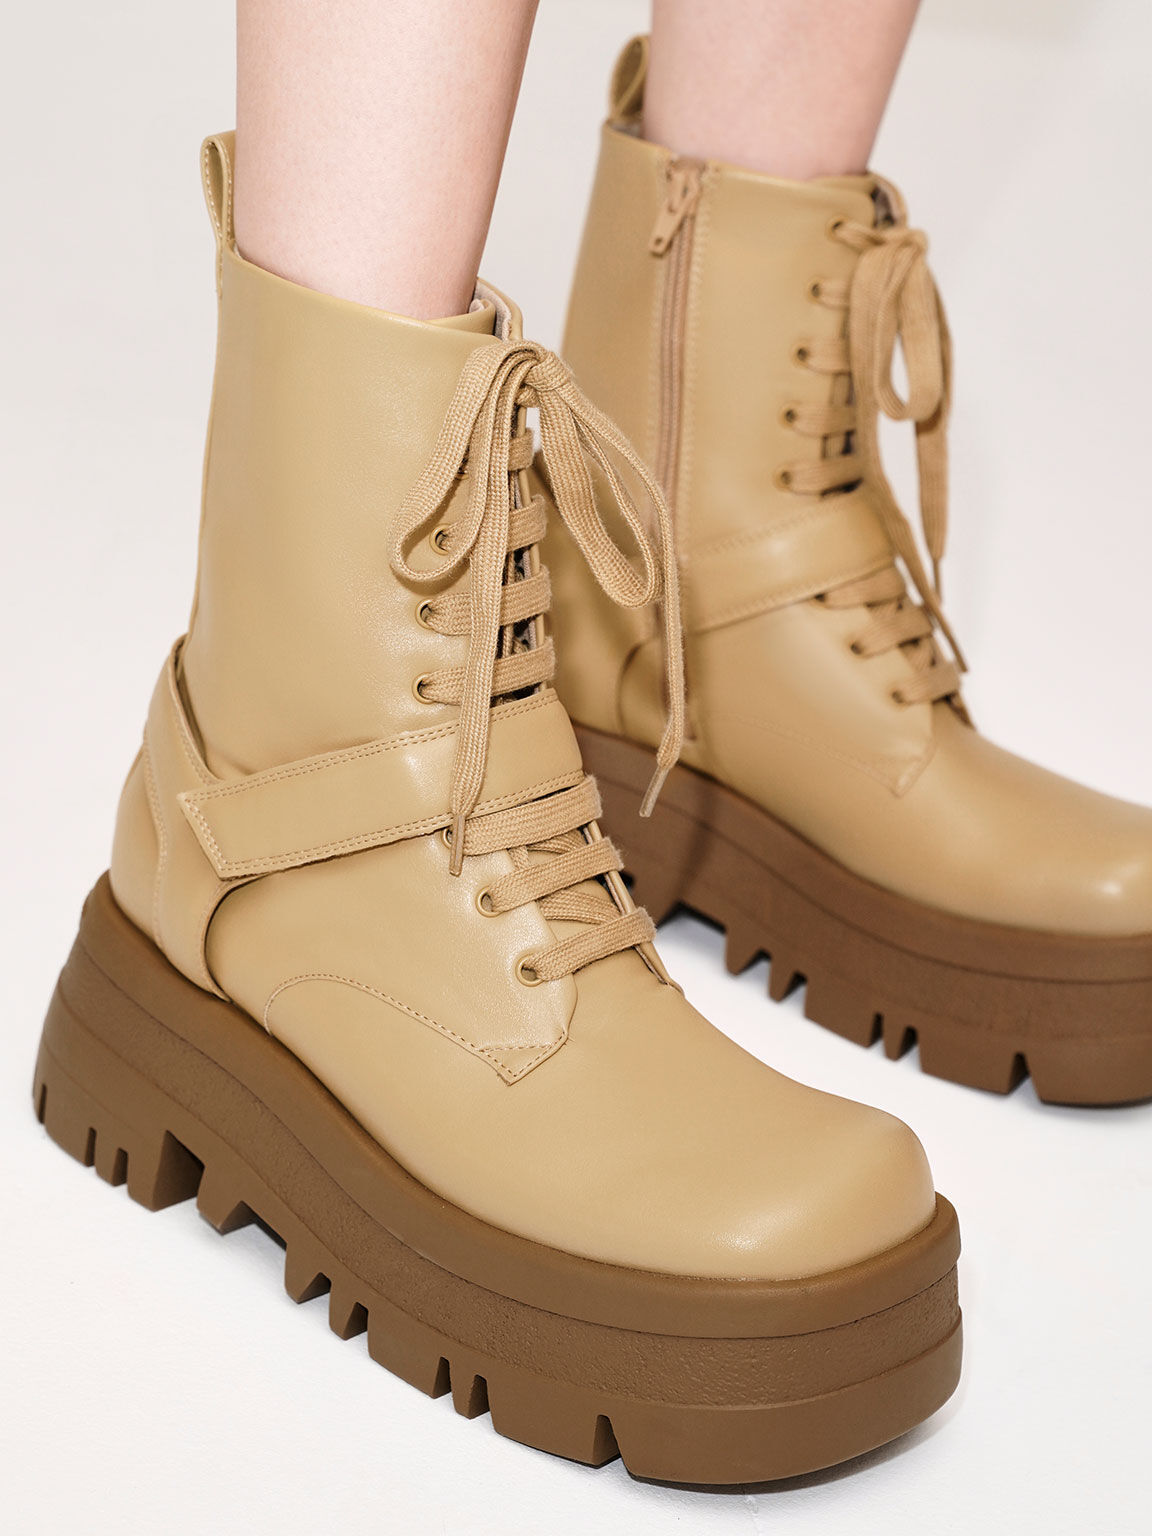 Rainier Belted Lace-Up Boots, Sand, hi-res